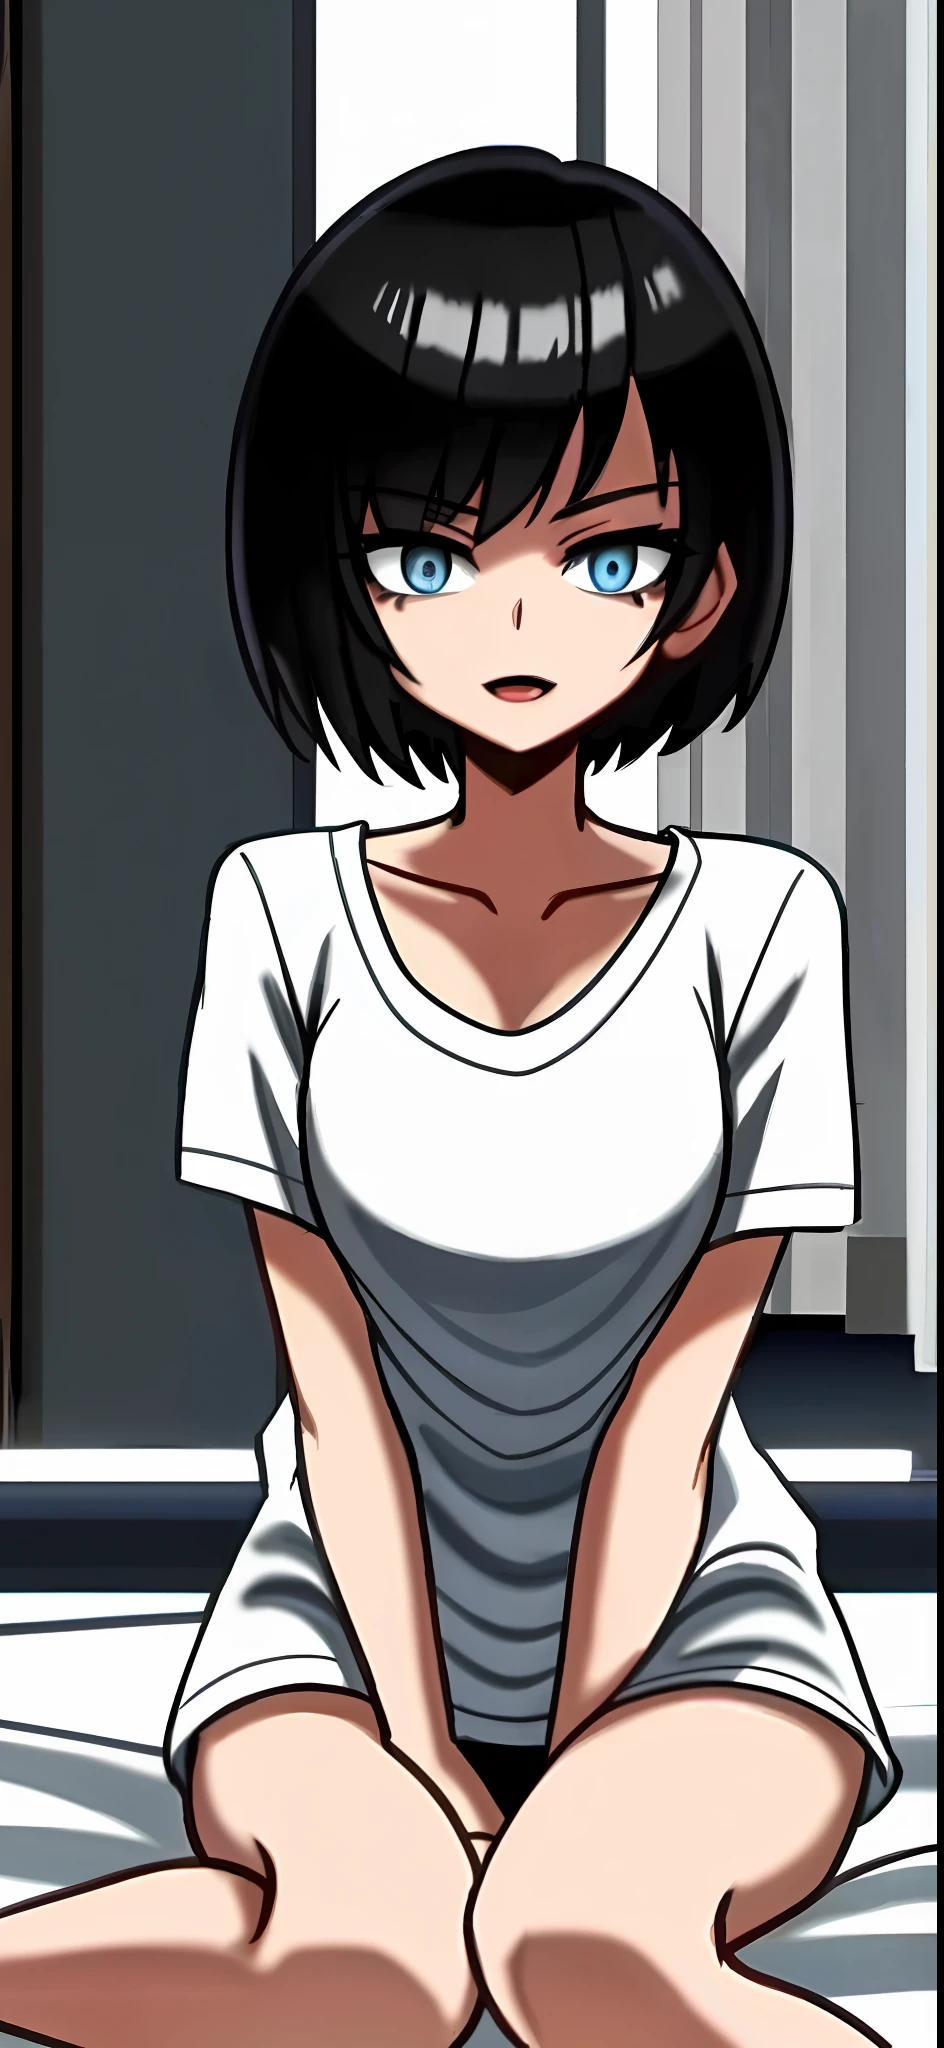 Black-haired girl with short haircut and blue eyes, half-naked sitting on a white bed, straightening her hair with her hand, bent her legs under her, black T-shirt, half-open mouth, sexy, old anime style, darkened lighting